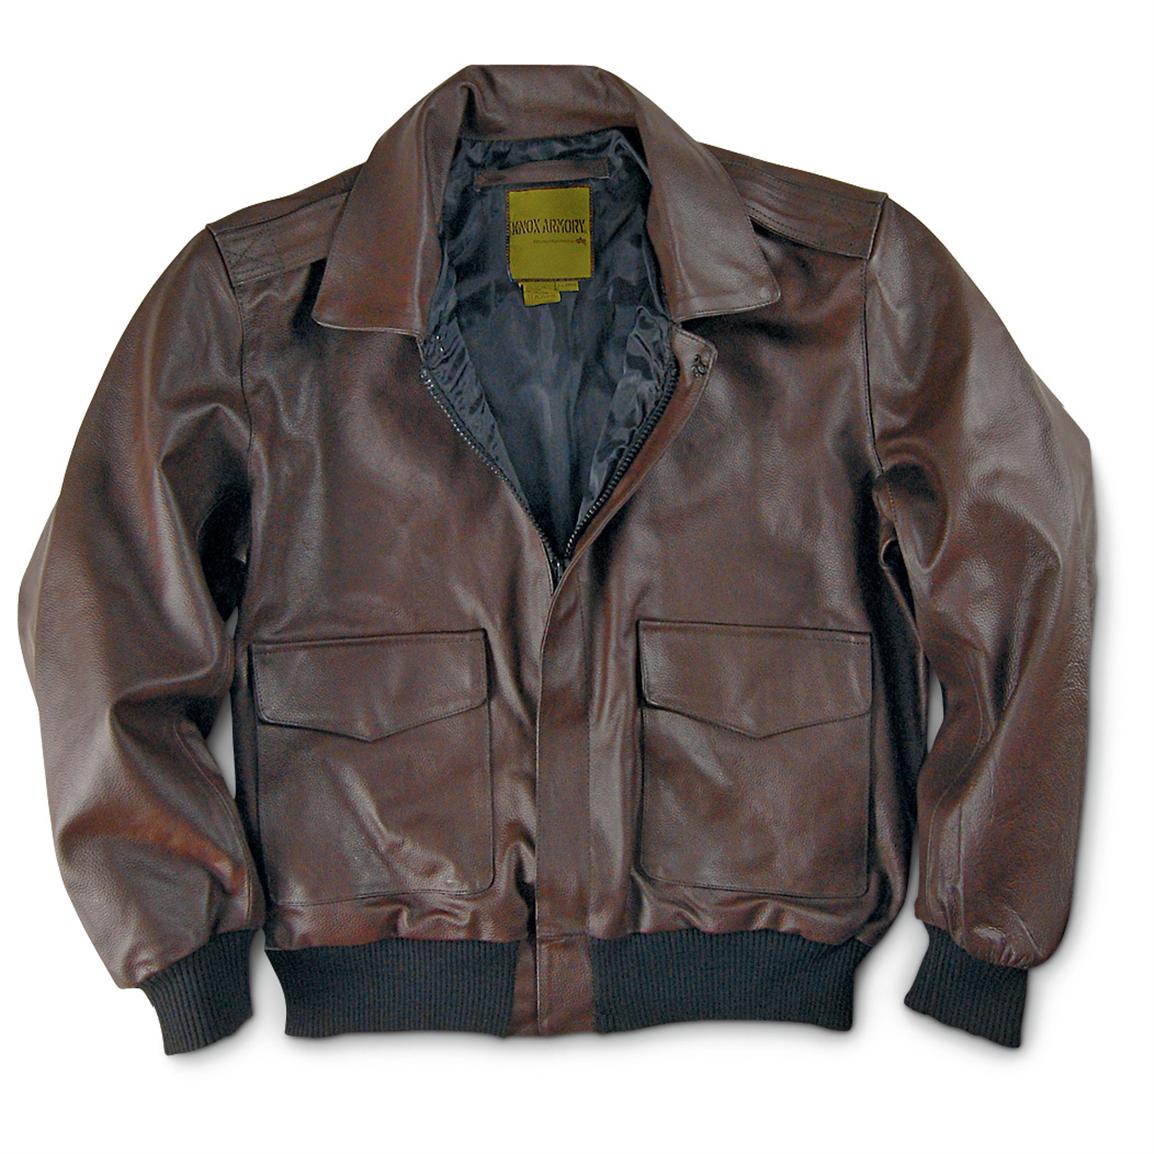 Knox Armory Military-style A2 Leather Jacket, Brown - 207051 ...